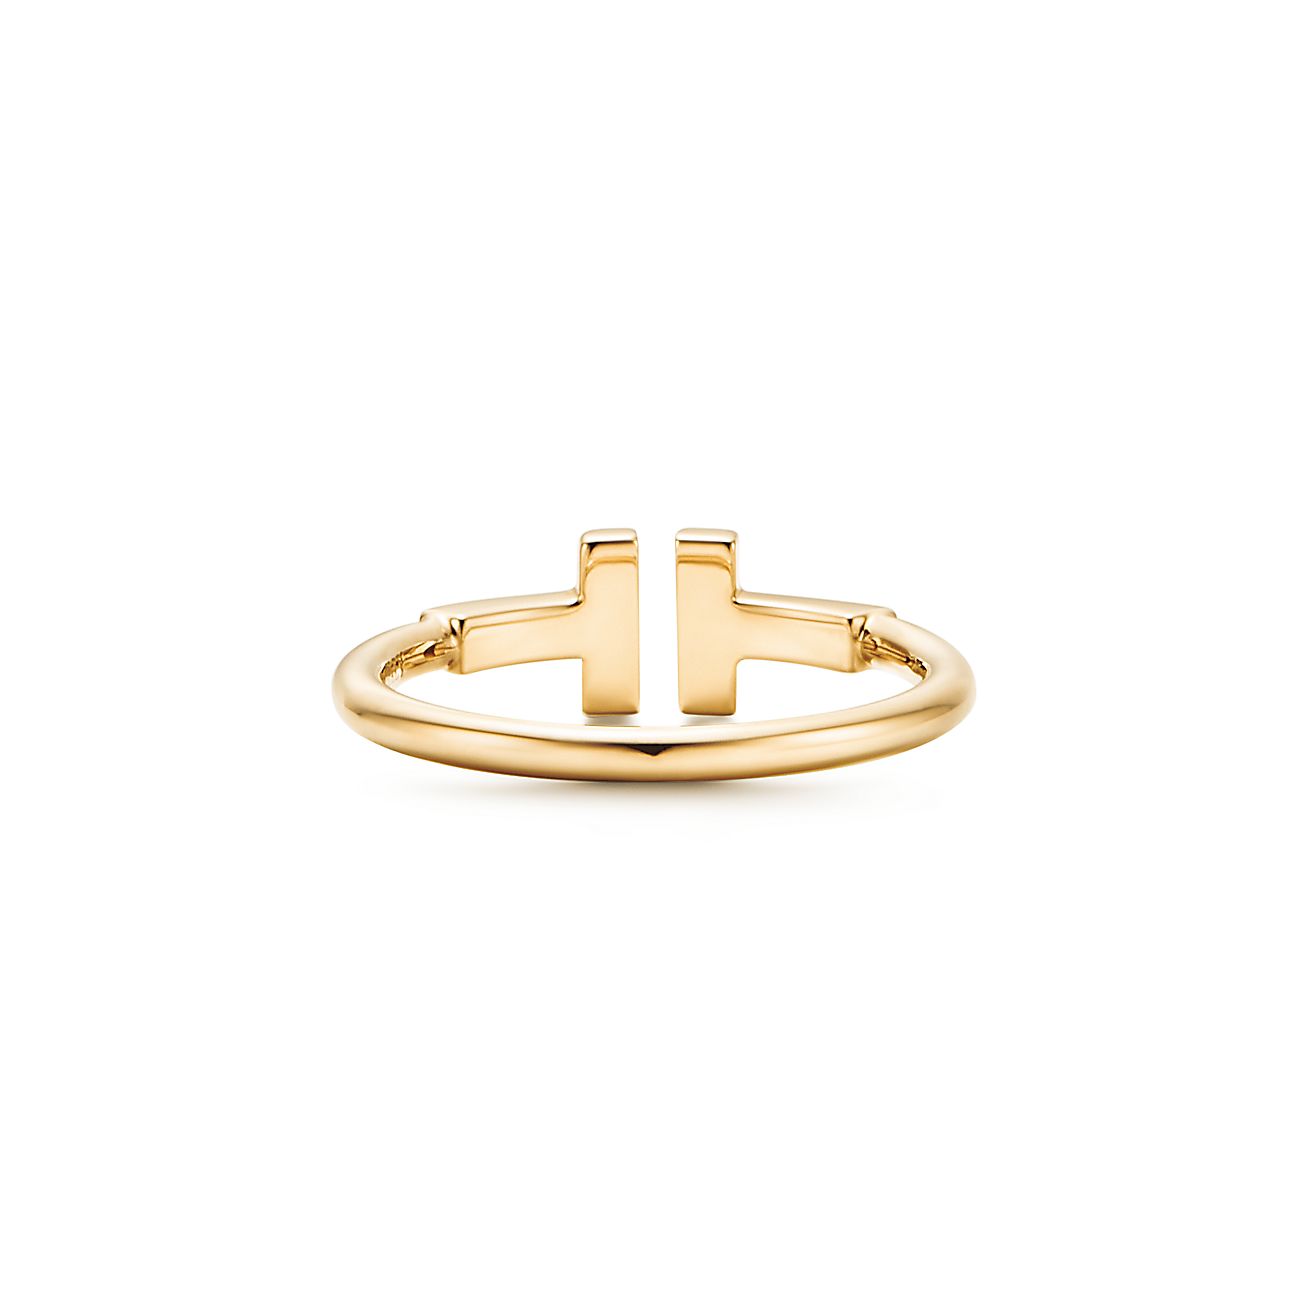 Tiffany T wire ring in 18k gold. | Tiffany & Co.